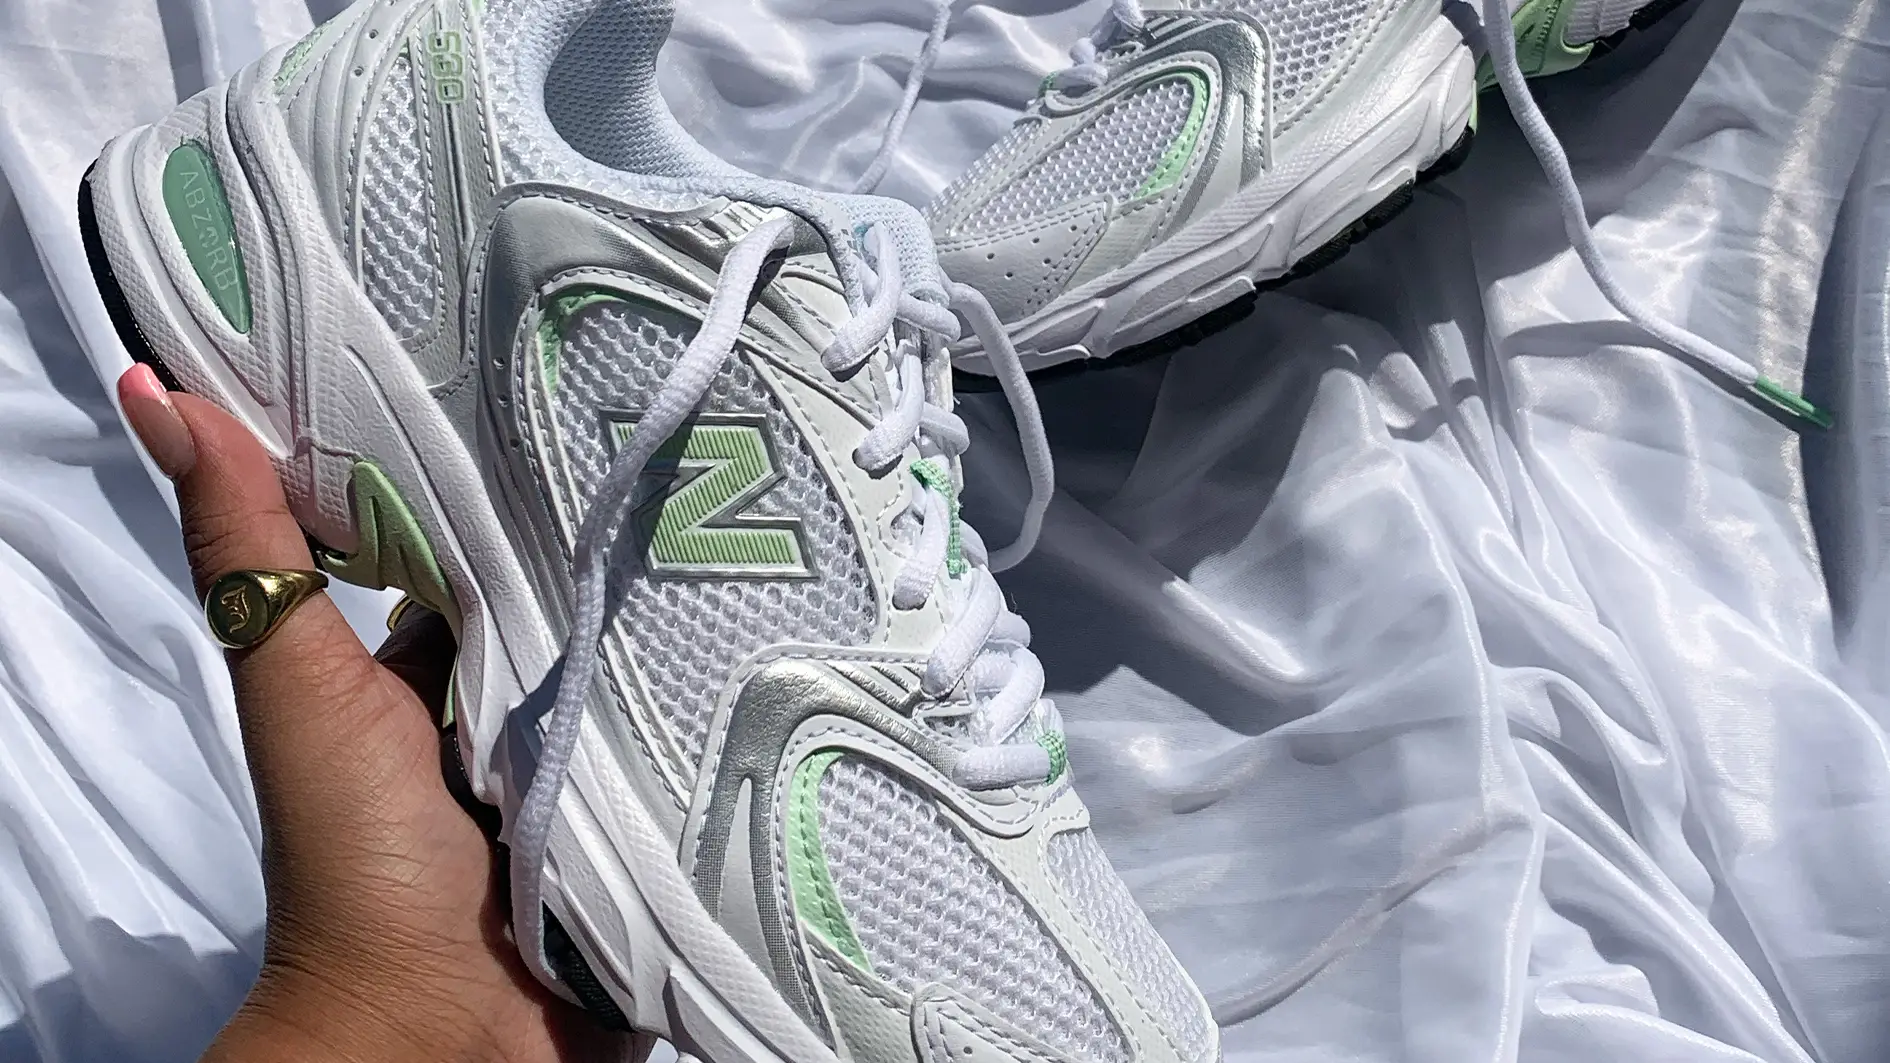 How Does The New Balance 530 Fit? Is It True To Size?